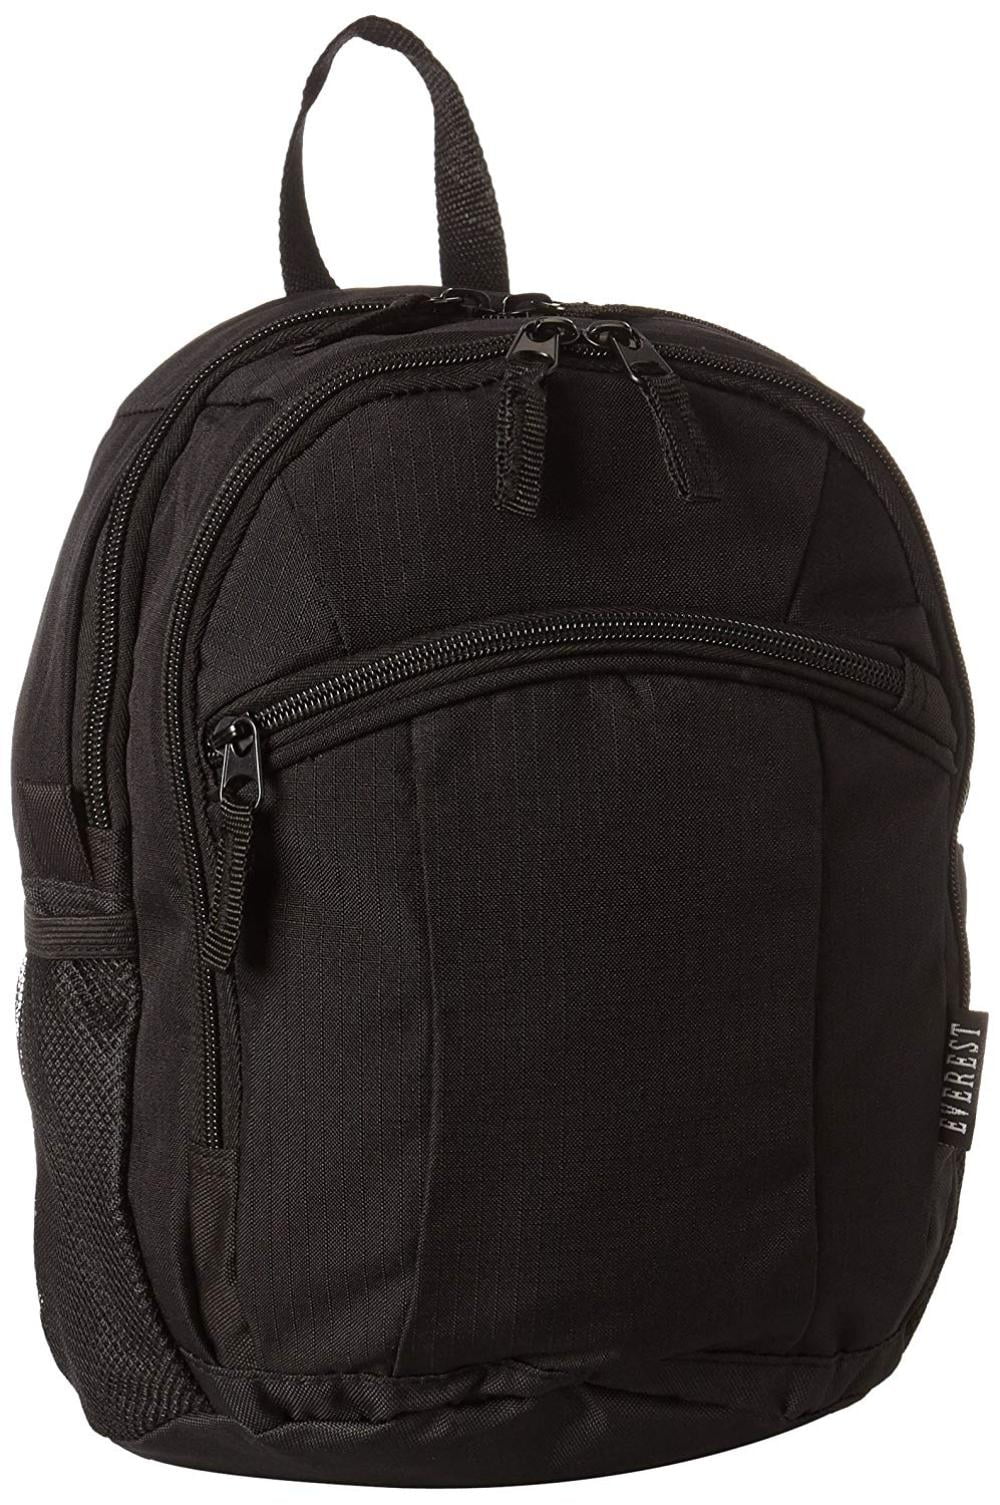 Everest - Deluxe Small Backpack, Black, One Size, Dimensions 9.5 x 6 x 13 (LxWxH) By everest ...